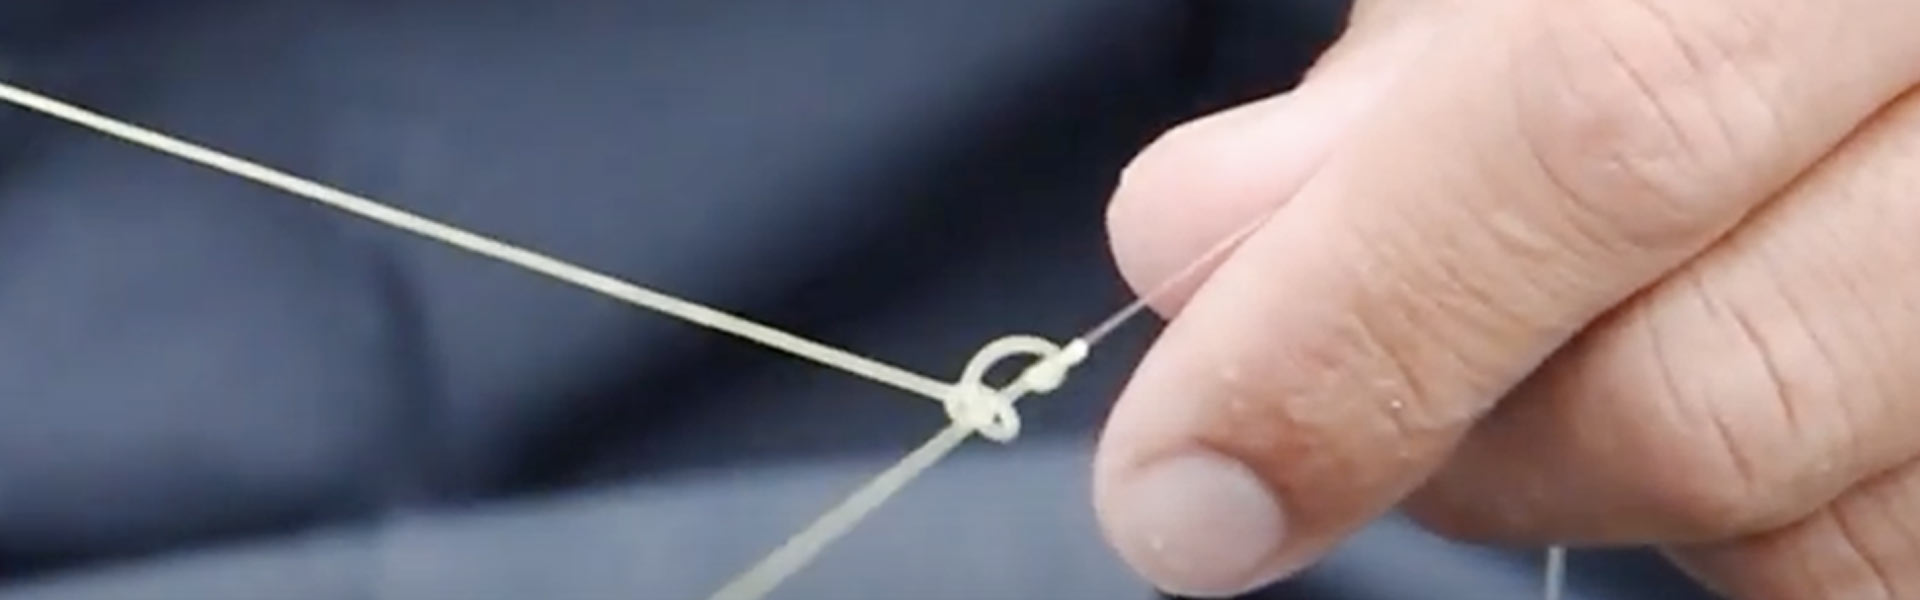 close up of a person tying a complex fishing knot